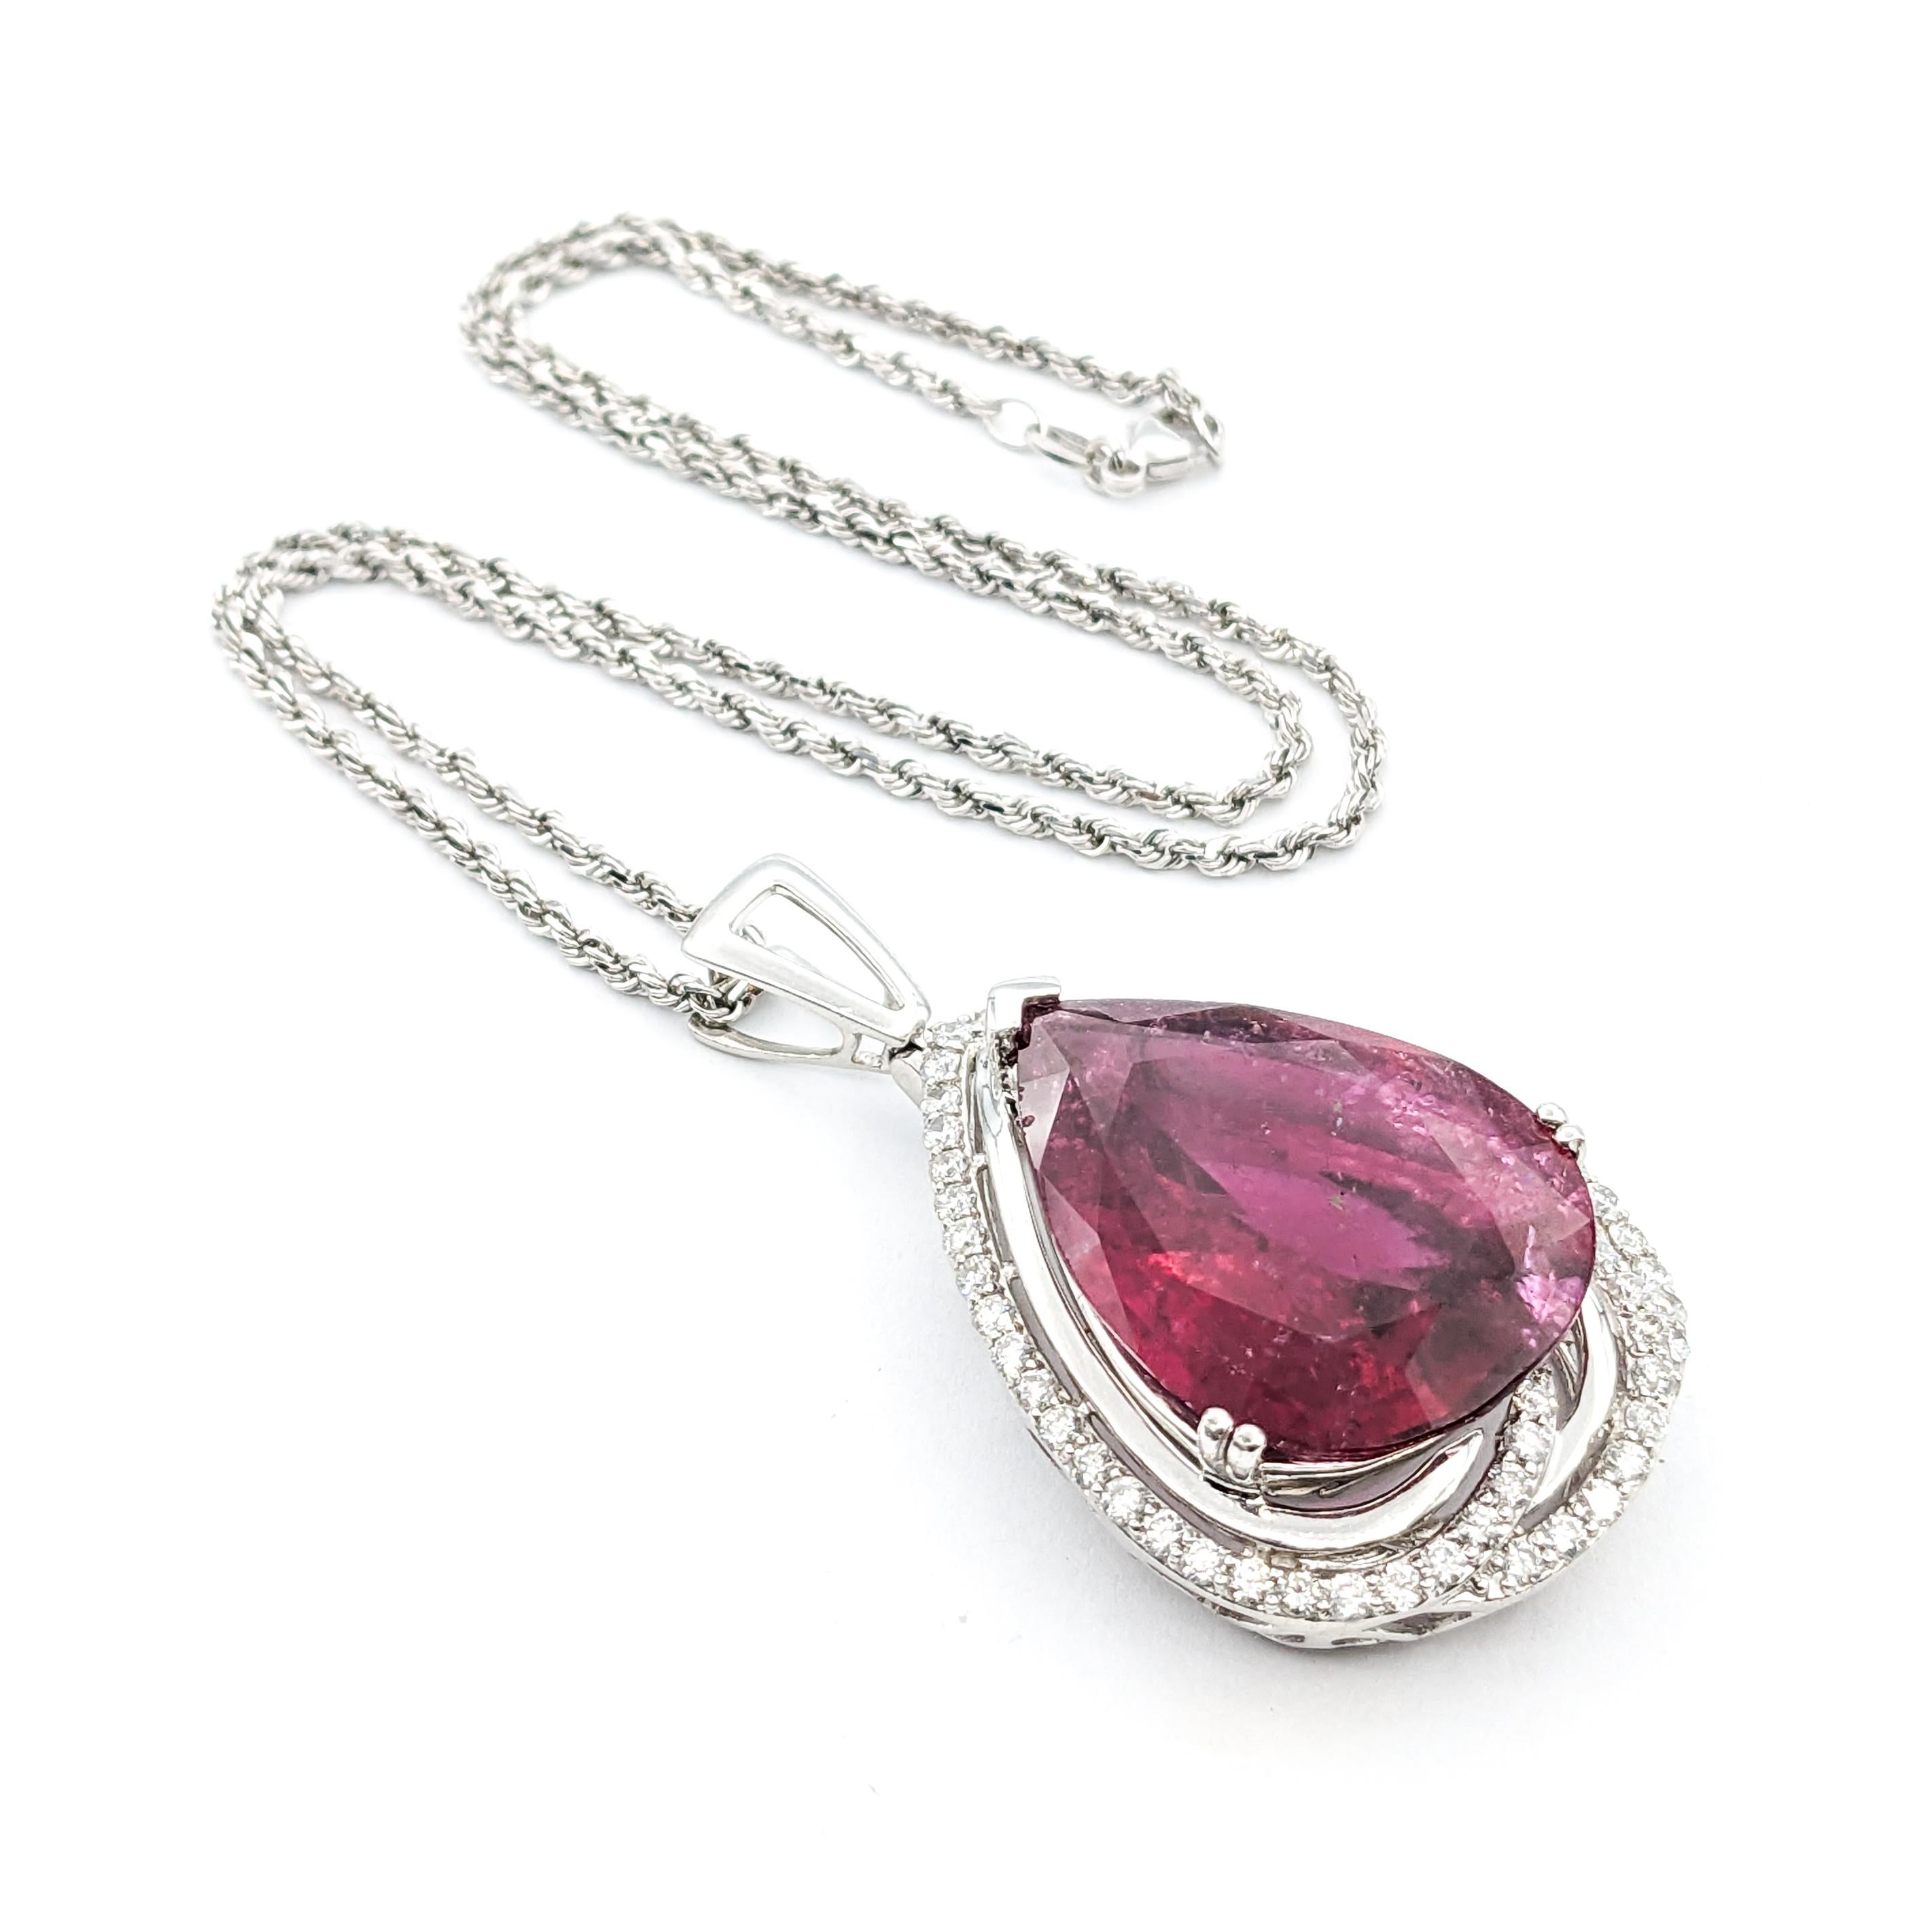 35.75ct Pink GIA Rubellite Tourmaline Pear & Diamond Necklace In Platinum For Sale 4